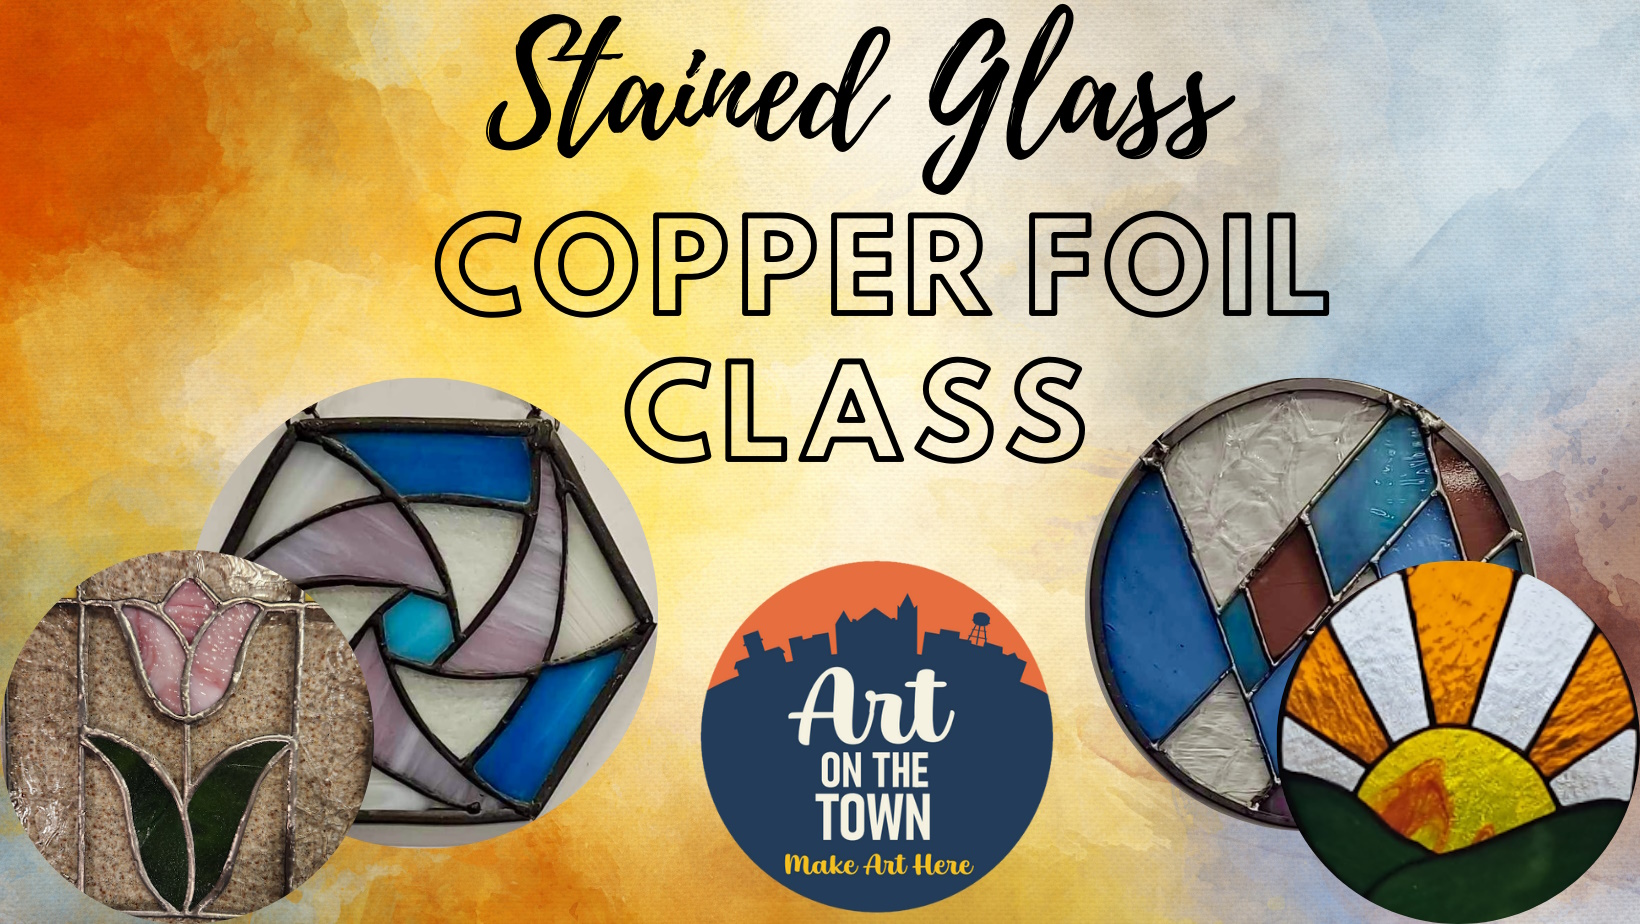 Stained Glass Copper Foil Class